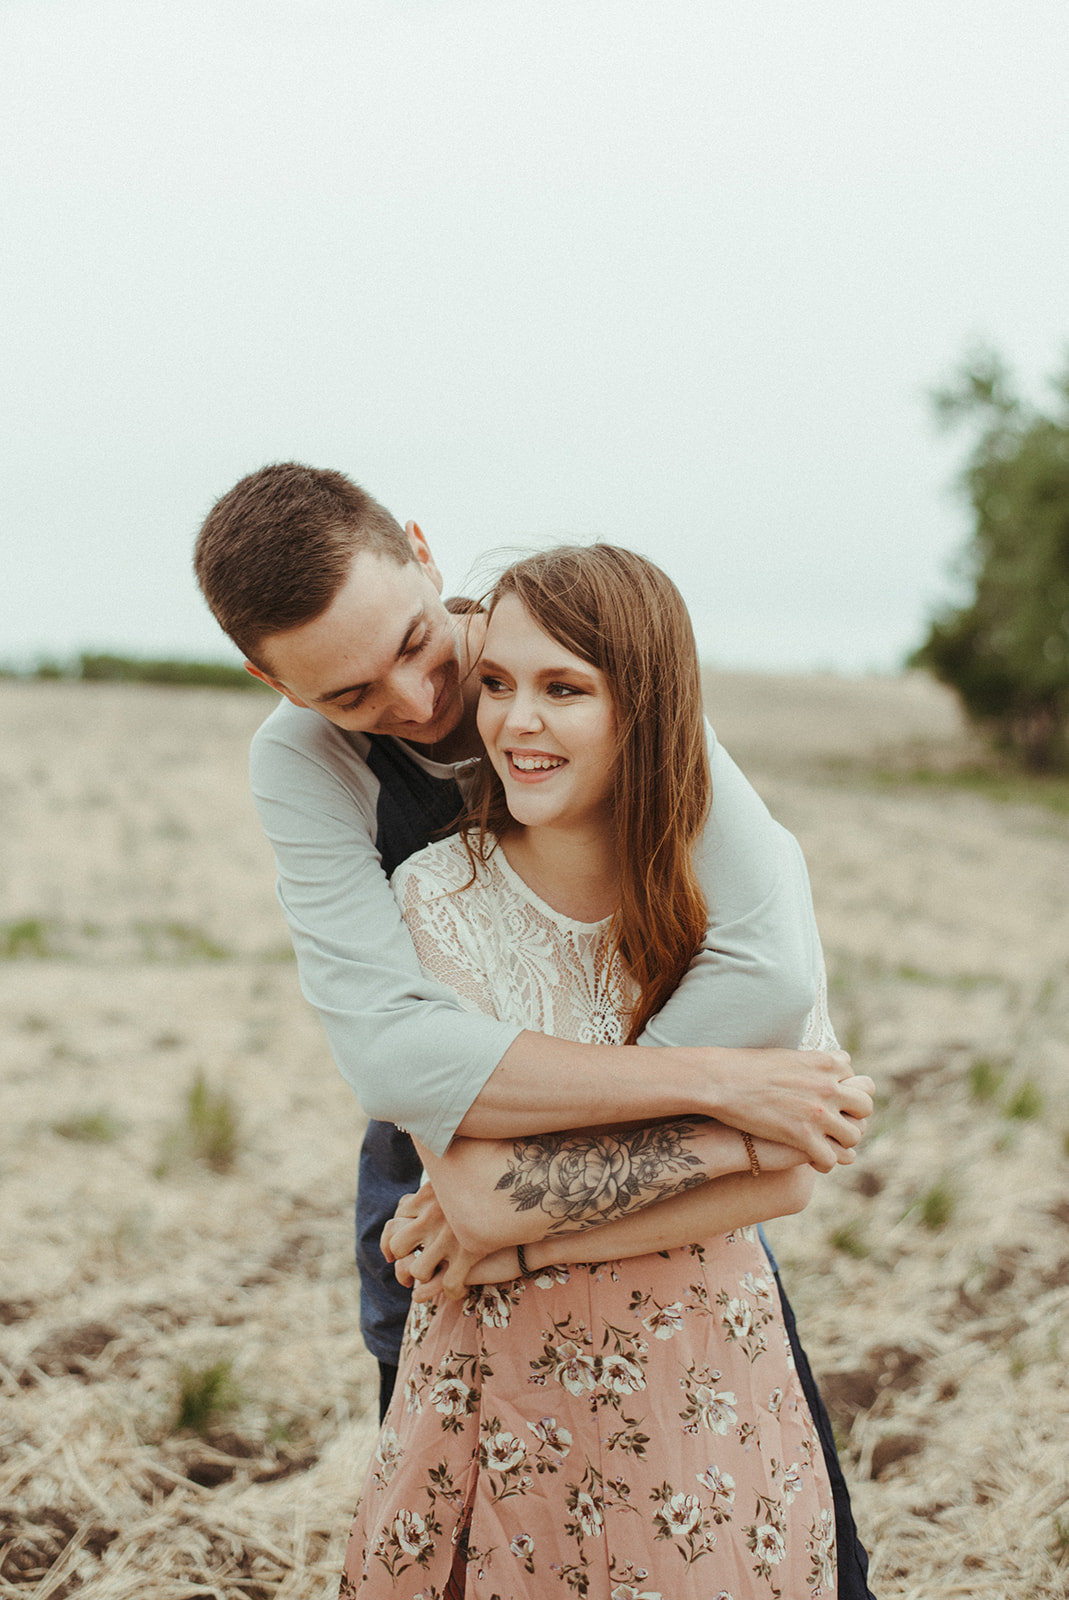 Engagement session inspiration, captured by Jessica Kaitlyn